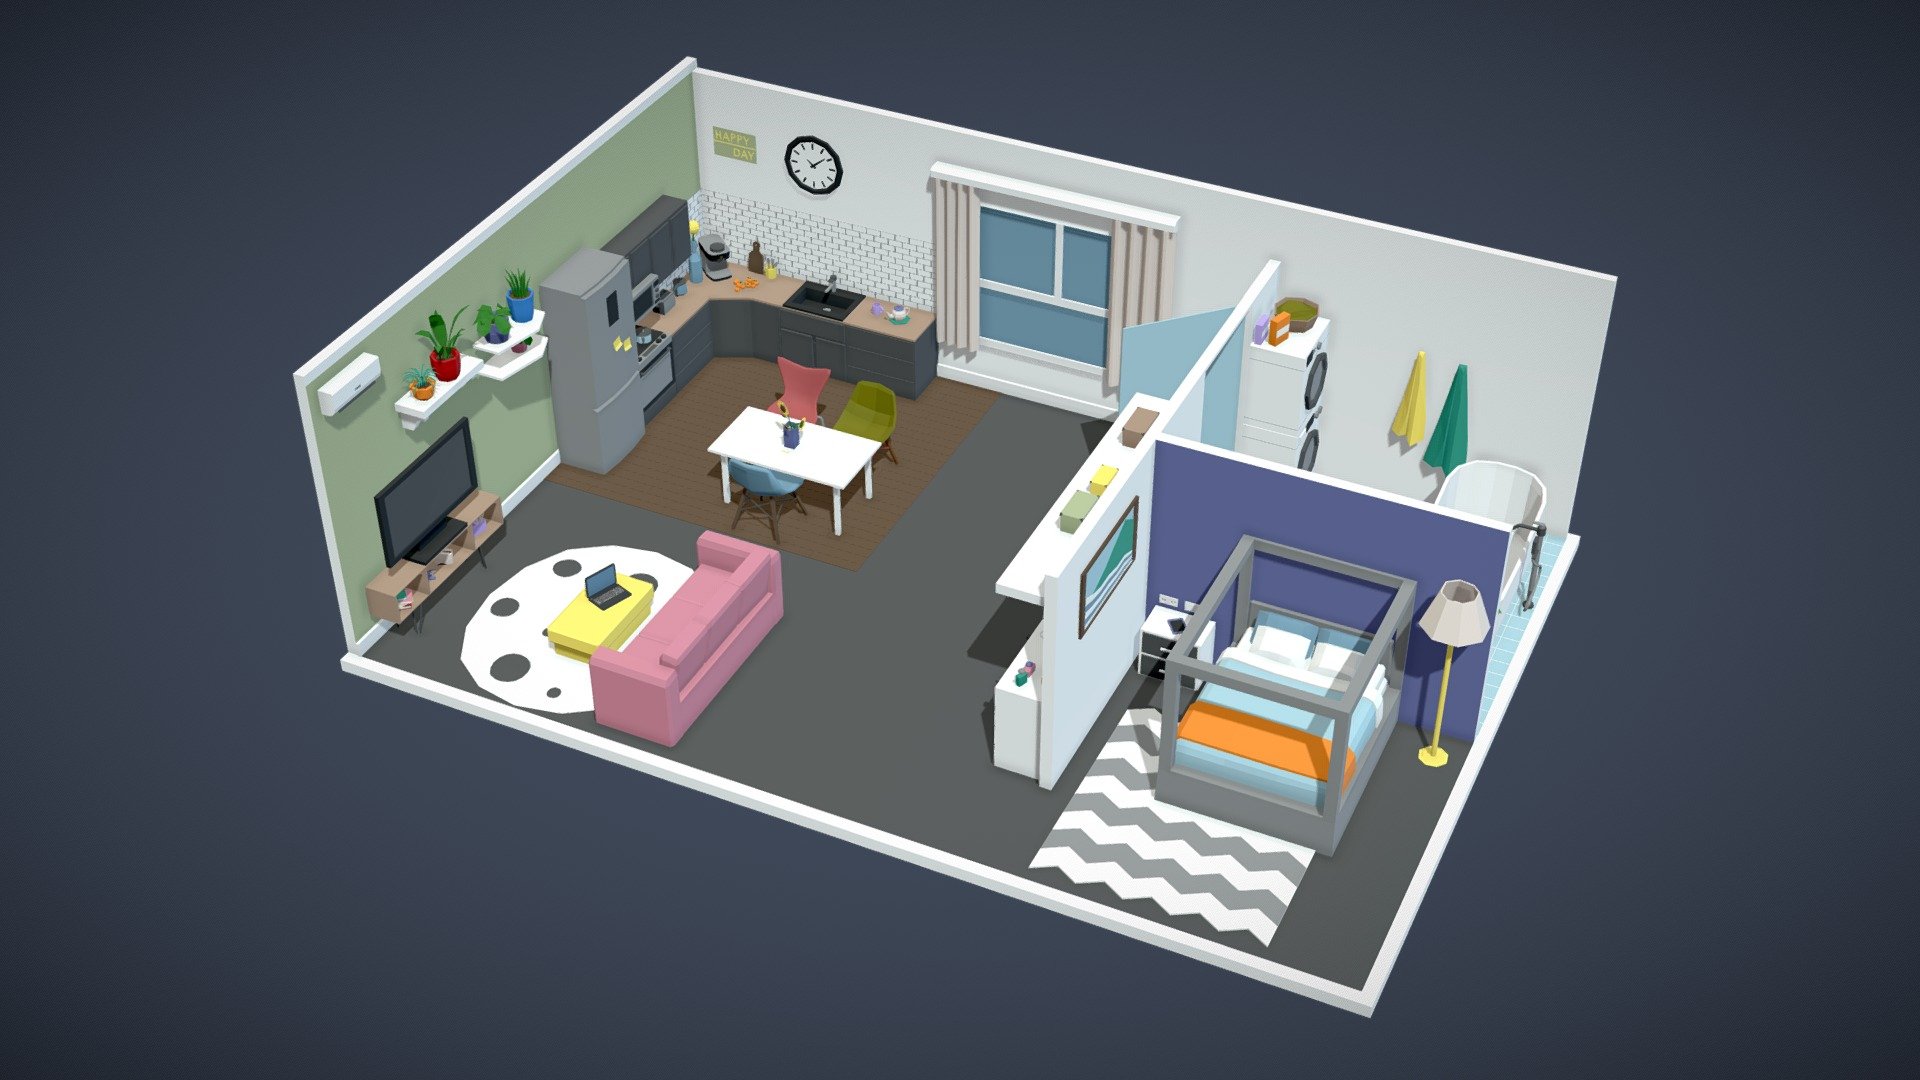 Low Poly Apartment n2 part of Low Poly Apartments Pack / Interiors download here

One texture (2048/1024/512/256/128px) and one material are used for the whole set

366 k triangles full set

Interior props: baths, curtains, kitchen sets, kitchen props, lights, props, room furniture, doors, floors, stairs, walls, windows, cabinets, beds, sofas, tables, chairs, plants, paintings, electronics, clothes, refrigerators, interior appliances, household appliances and much more!

Files: Unity  Unreal Engine 5 package (is compatible with version UE 5.1)  Blender  fbx  obj  glTF

This pack is a collection of 860 low poly assets to easily create your top any quality room, any apartment/house. 10 apartments included!

Can be used for games, rendering, advertising. The pack allows you to build any interior to your liking!

If you have any questions feel free to contact me - Low Poly Apartment n2 - 3D model by Mnostva 3d model